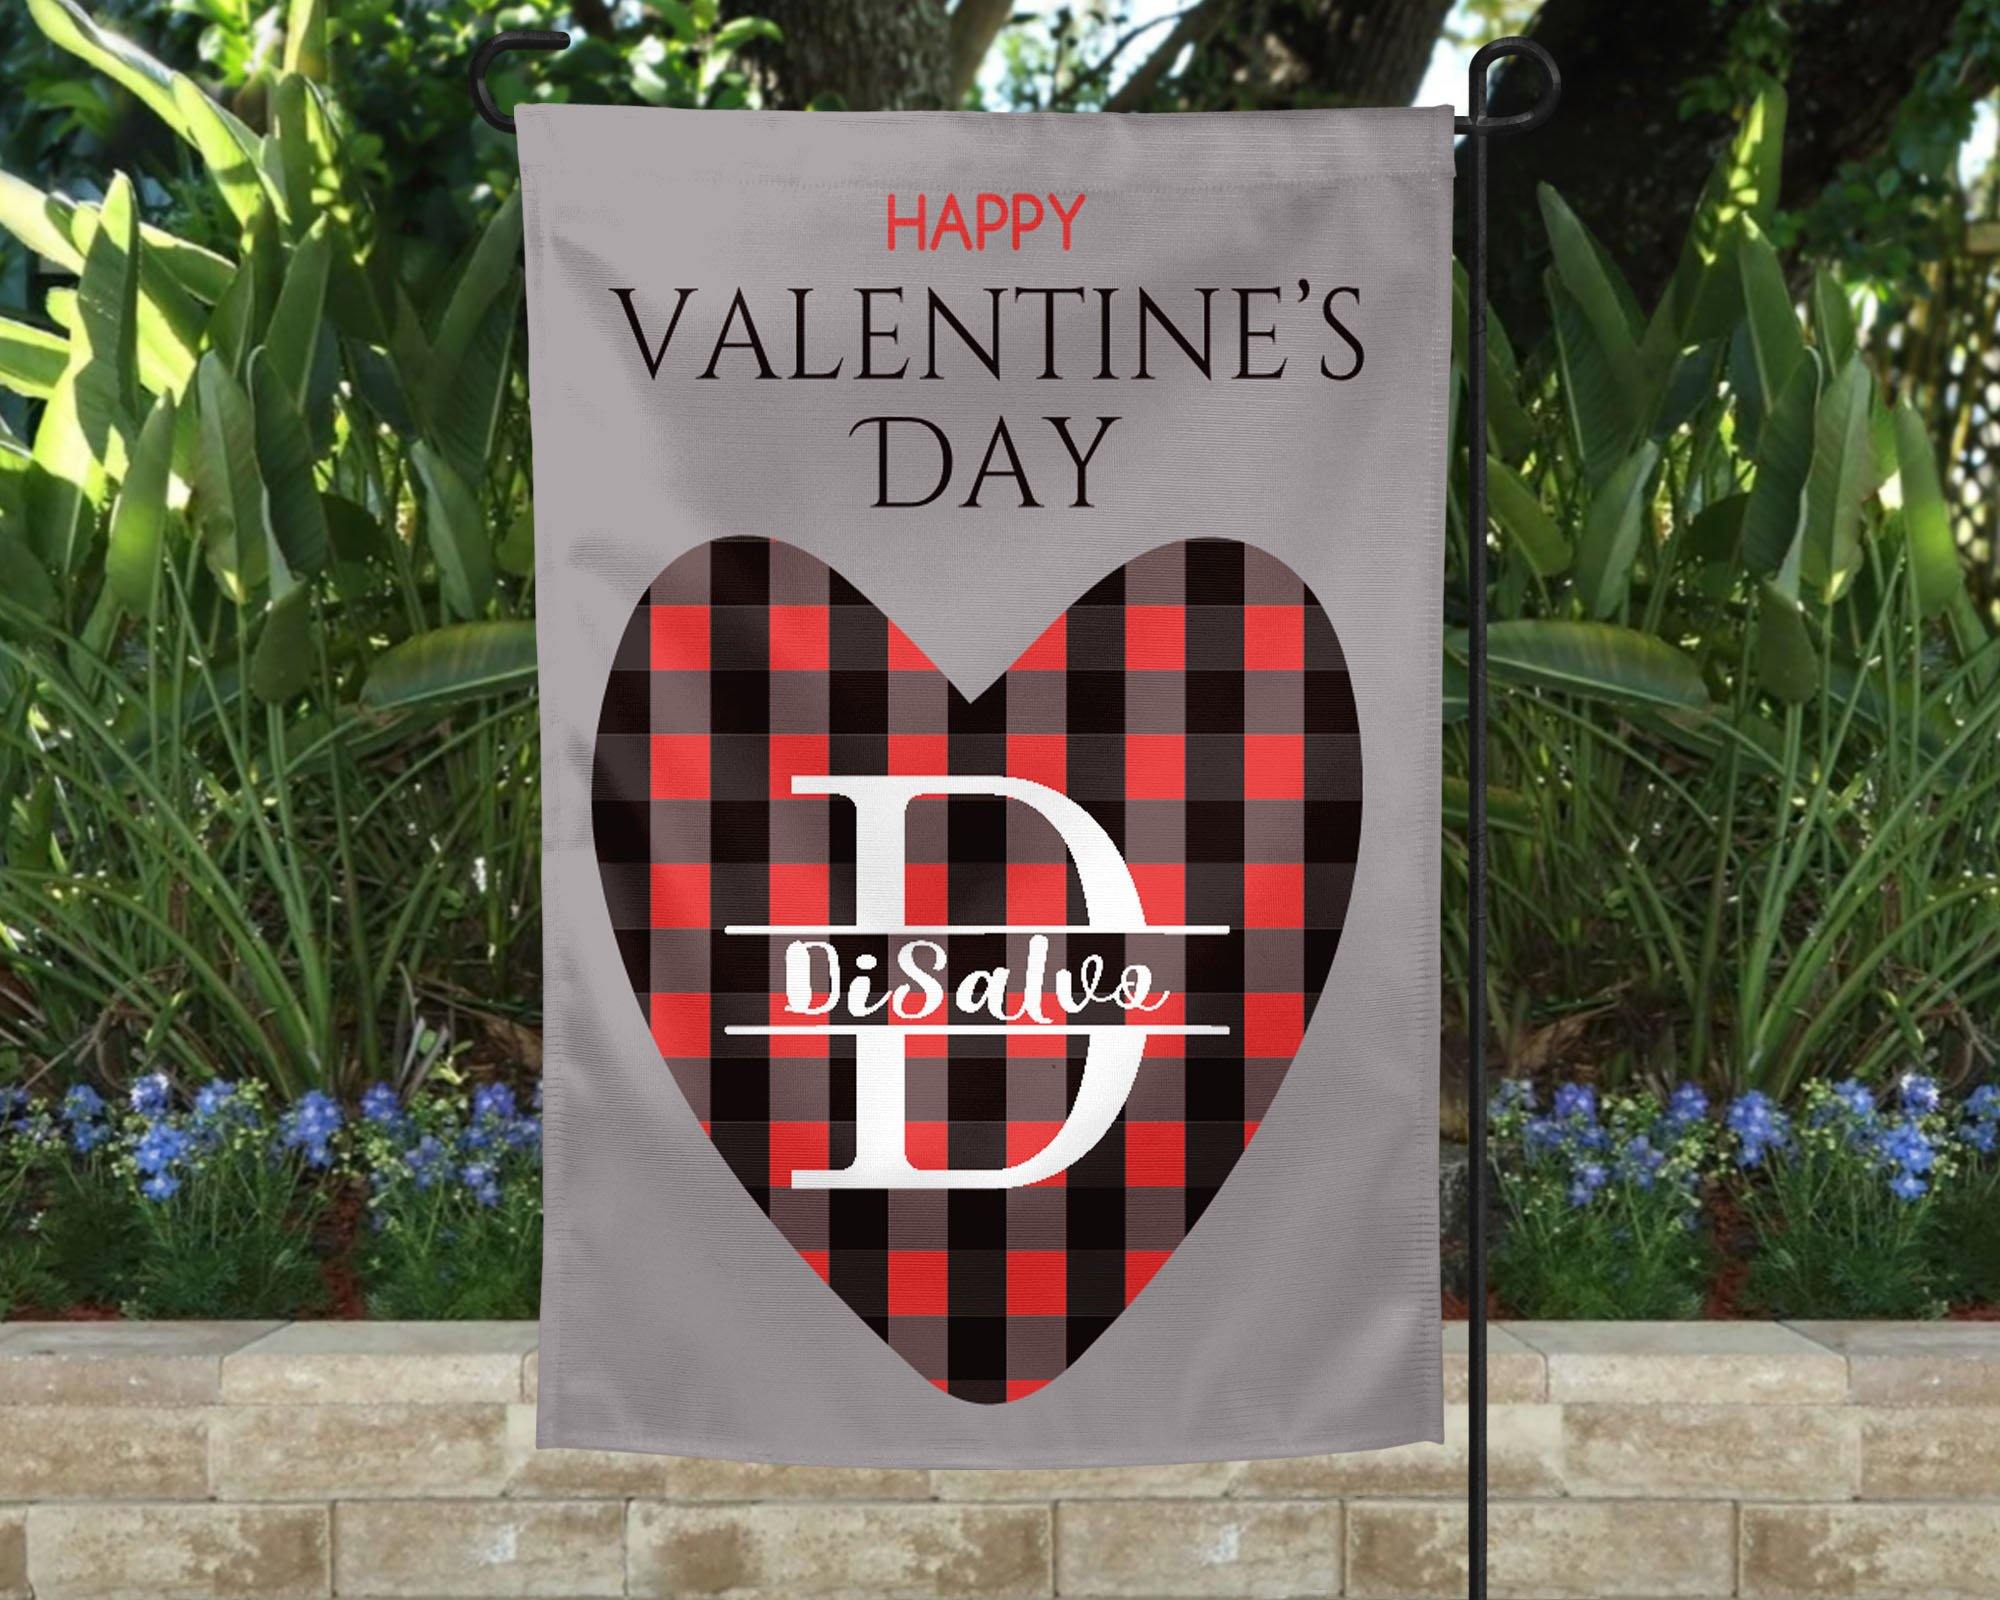 Personalized Garden Flag | Custom Yard Decorations | Happy Valentines Day - This & That Solutions - Personalized Garden Flag | Custom Yard Decorations | Happy Valentines Day - Personalized Gifts & Custom Home Decor